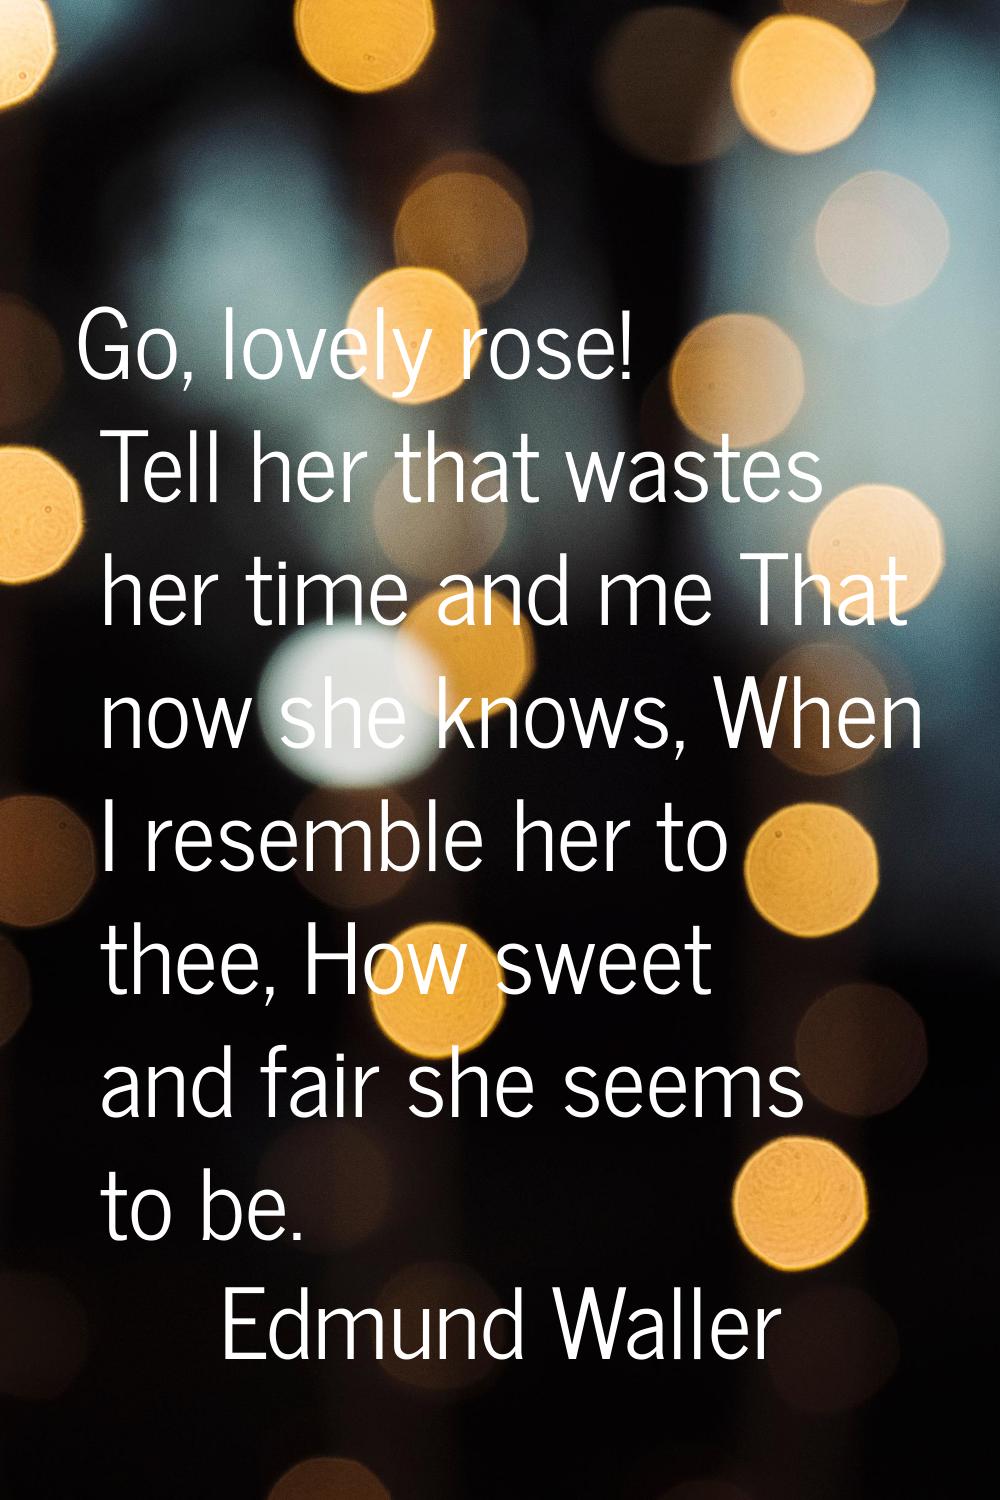 Go, lovely rose! Tell her that wastes her time and me That now she knows, When I resemble her to th